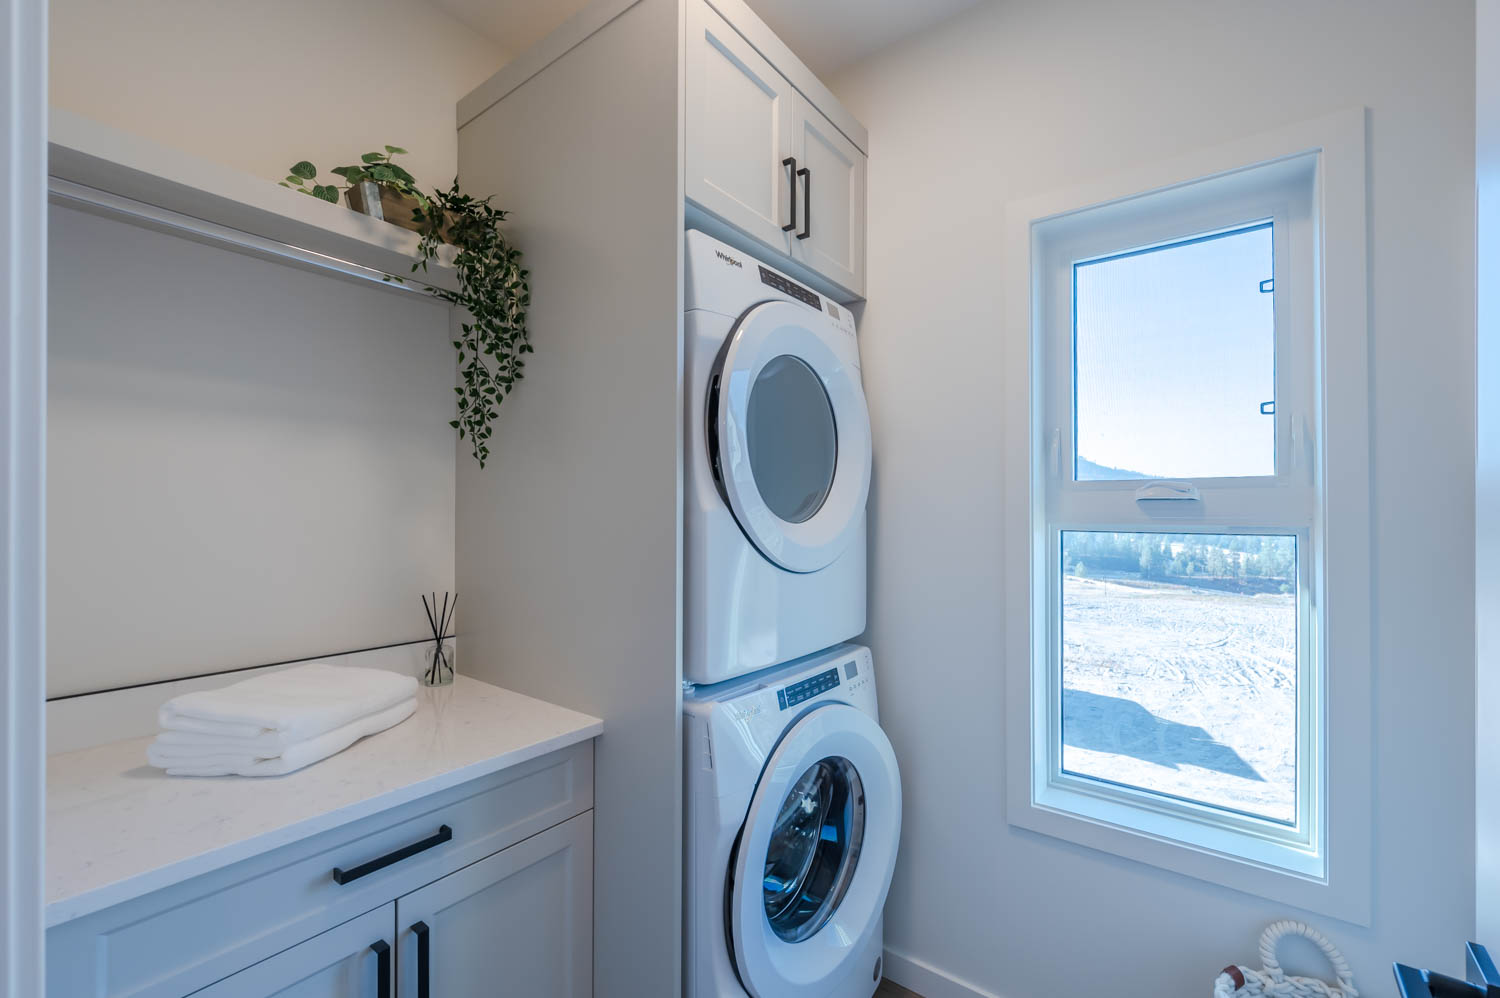 A stacked washer and dryer in a laundry room.